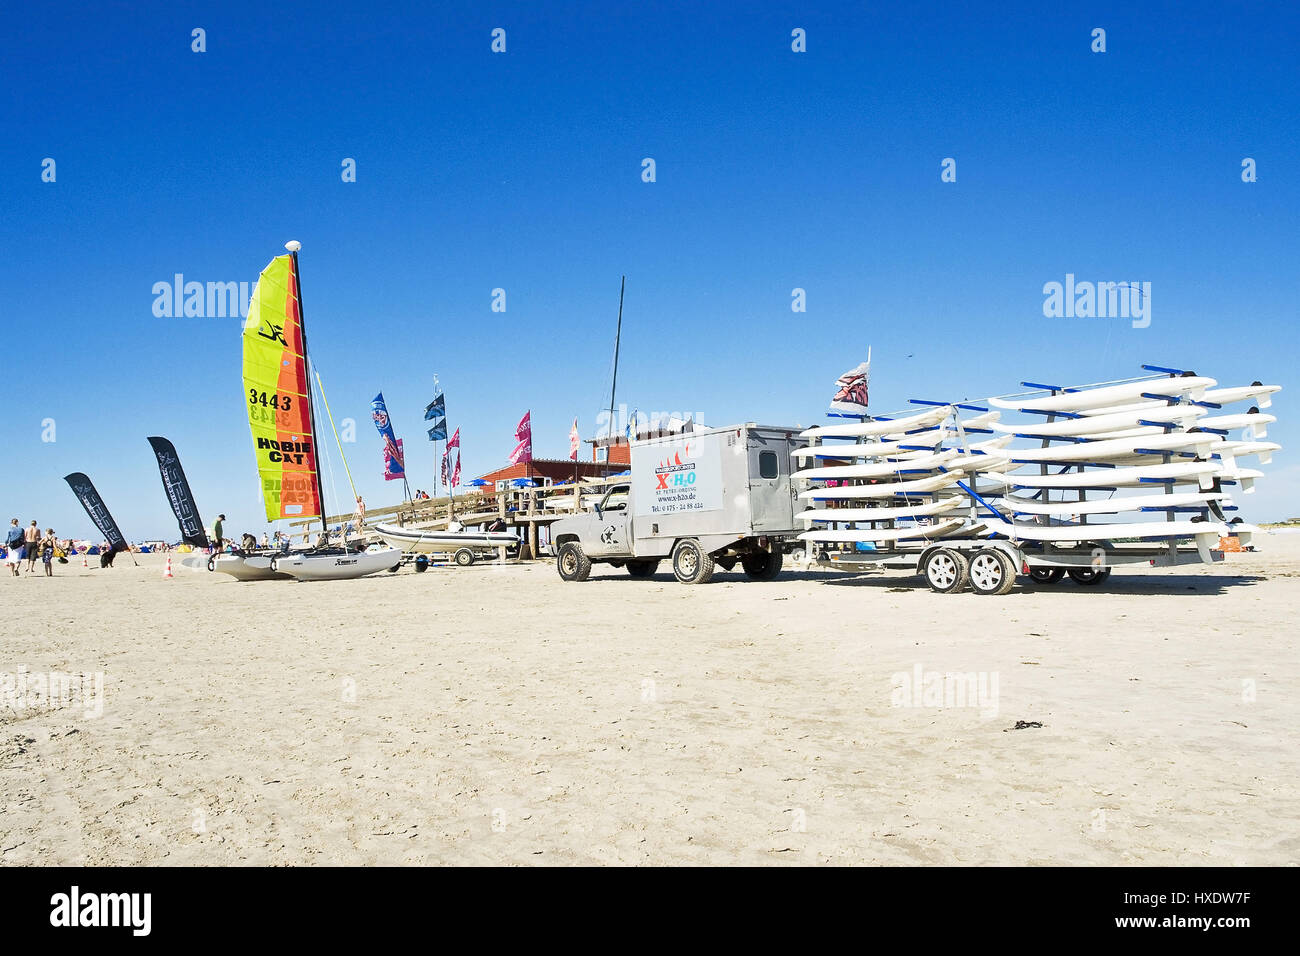 Surfing school on the beach of Saint Peter-Ording, Surfschule am Strand von St. Peter-Ording Stock Photo